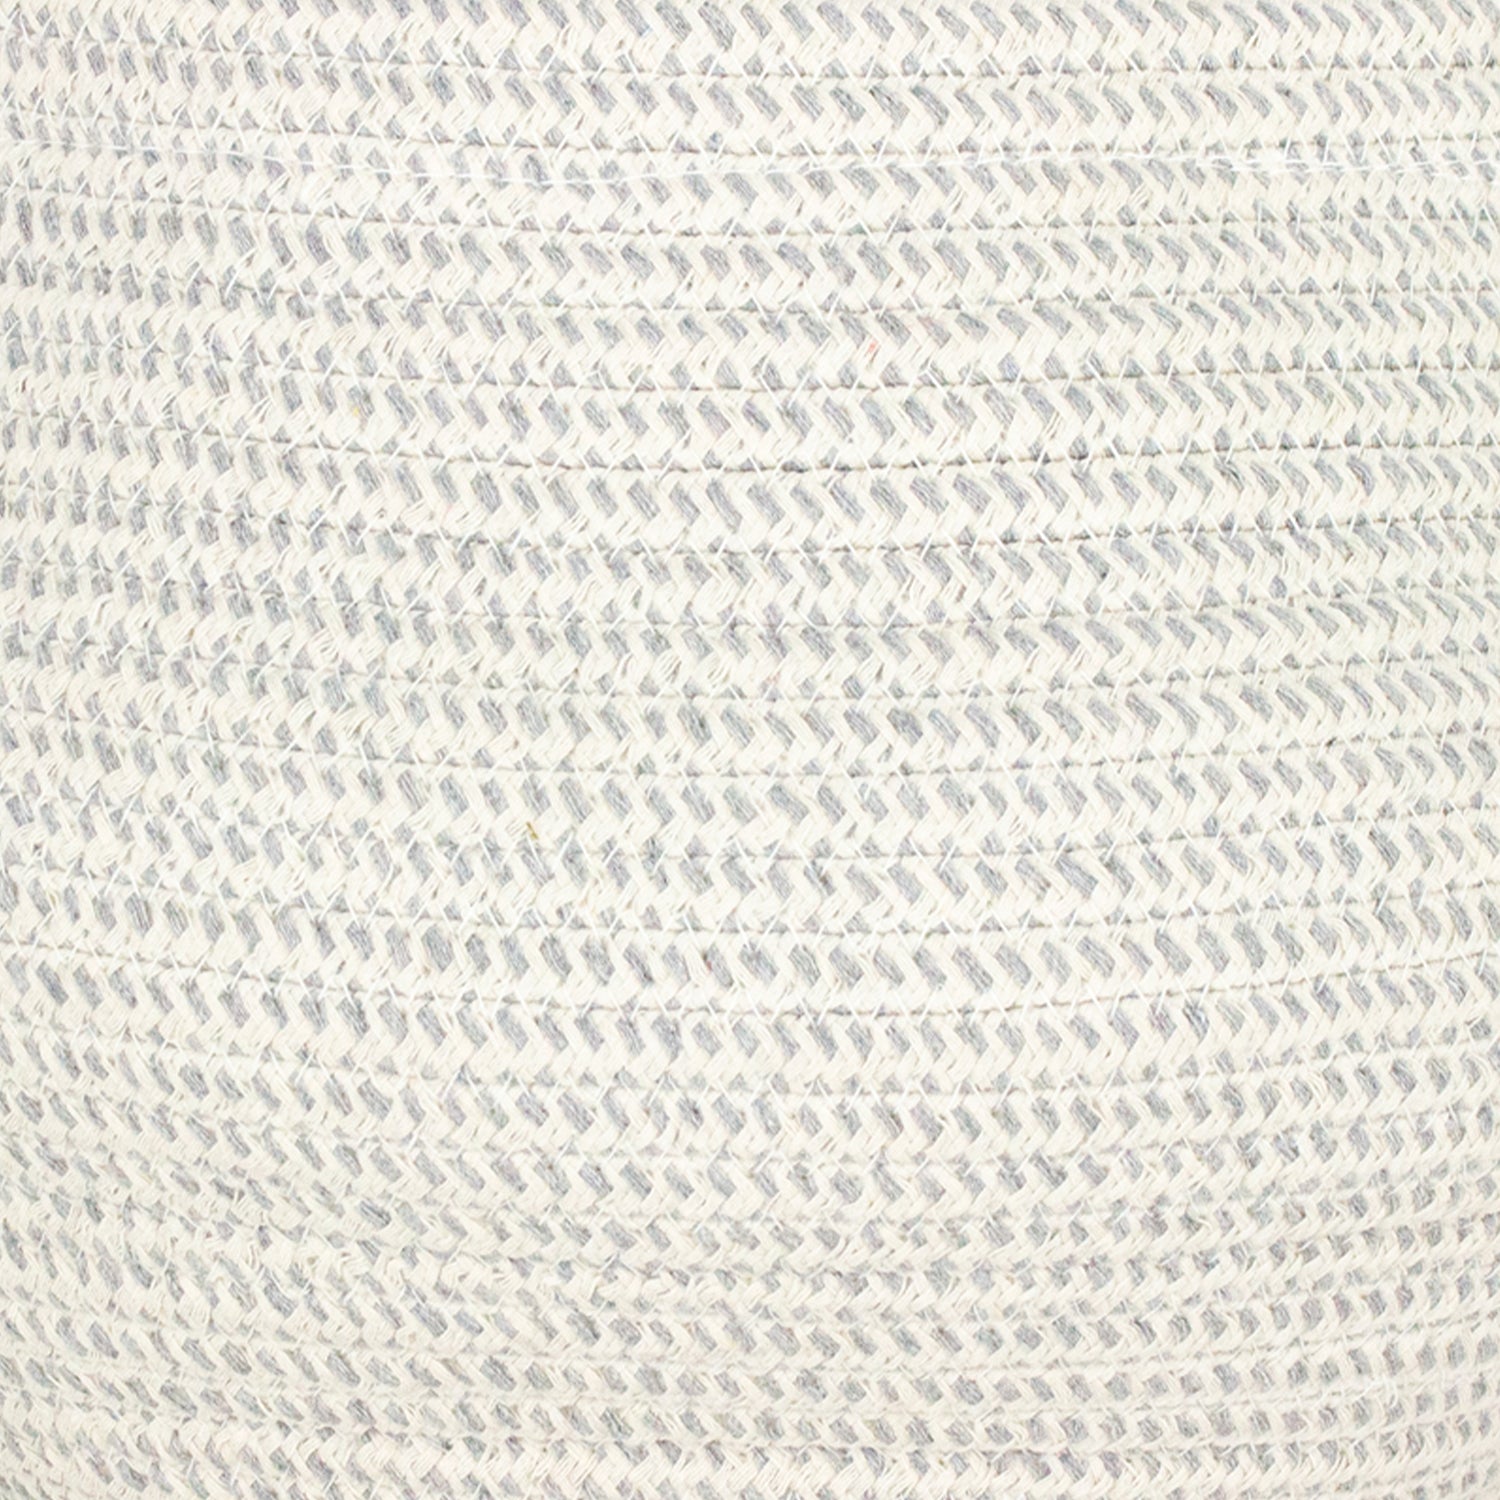 heathered grey cable basket material